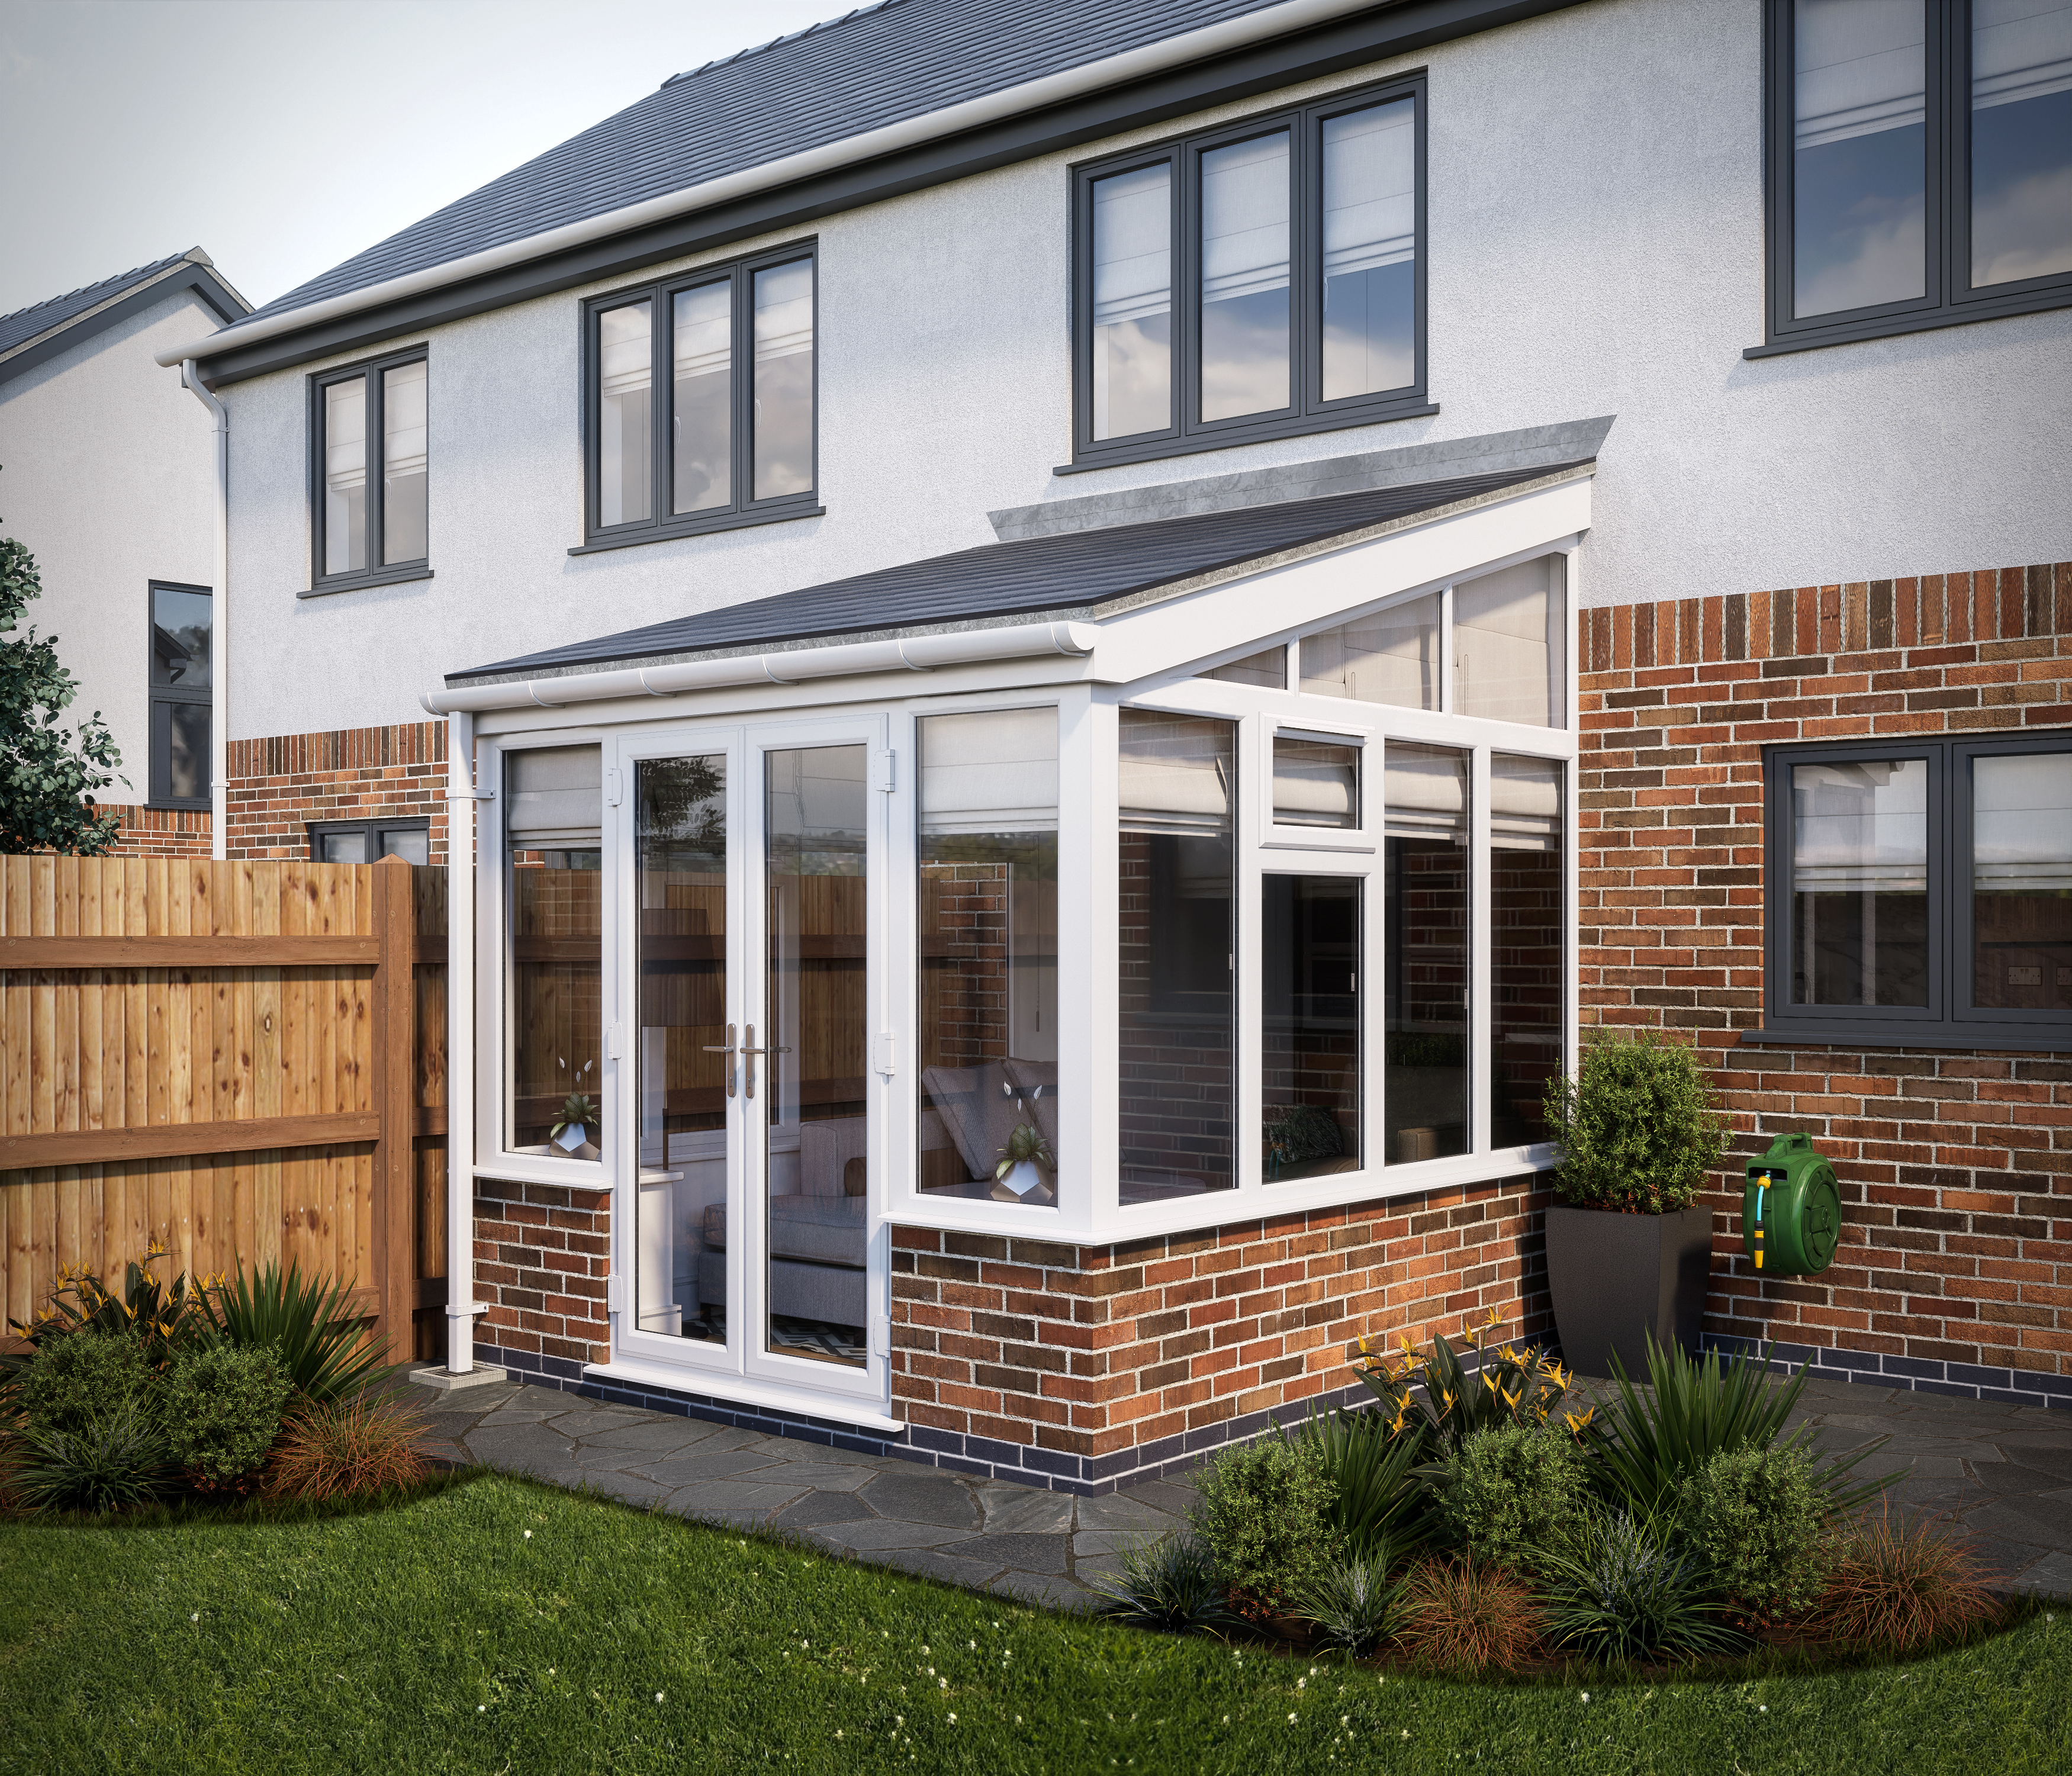 Image of SOLid Roof Lean to Conservatory White Frames Dwarf Wall with Titanium Grey Tiles - 13 x 10ft